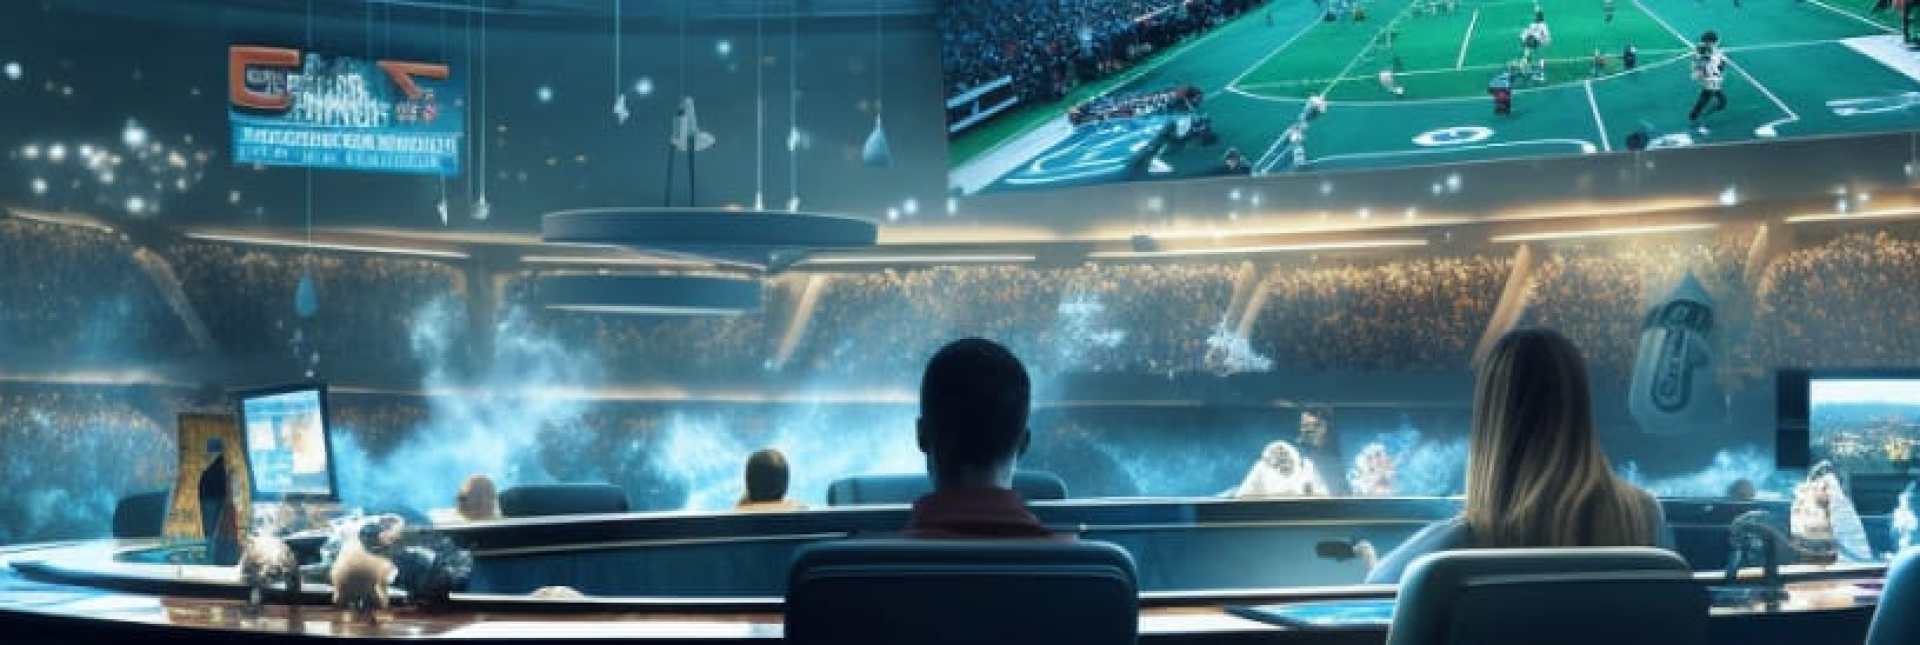 Advantages of sports betting with crypto